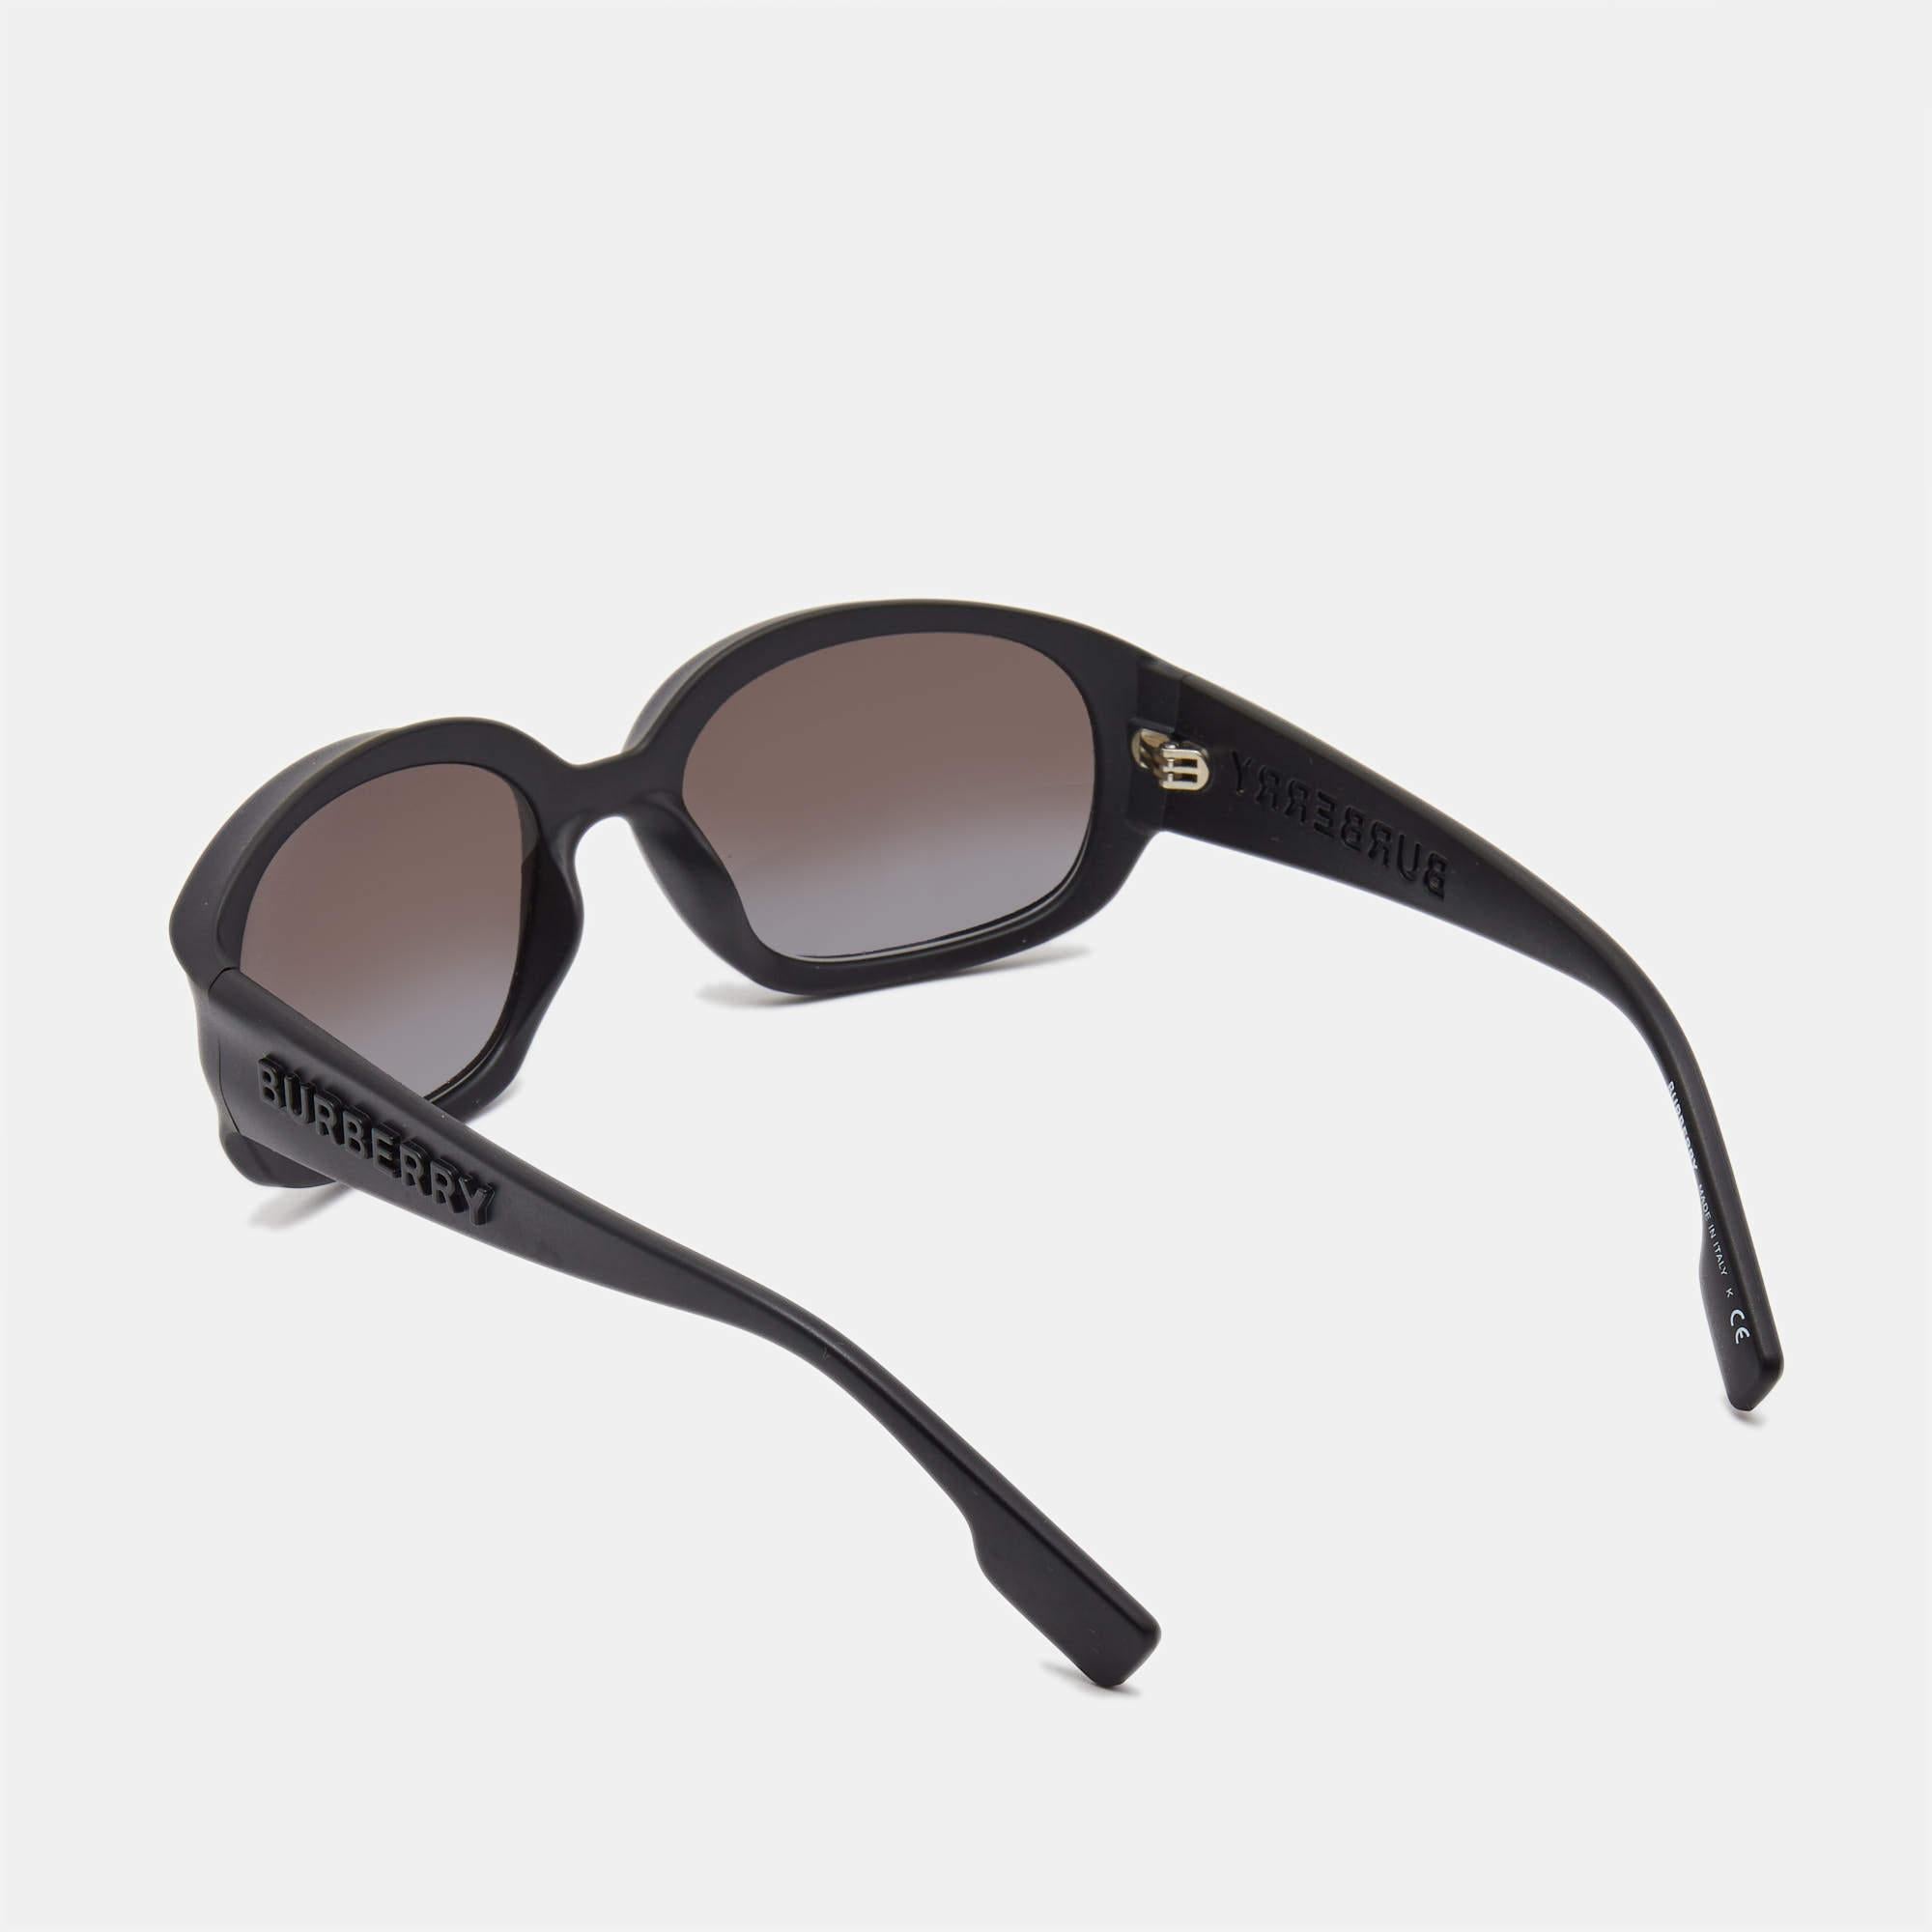 Elevate your eyewear game with these Burberry black sunglasses. Meticulously crafted from premium materials, they offer unparalleled protection and a timeless design, making them a must-have accessory for the fashion-forward.

Includes: Original